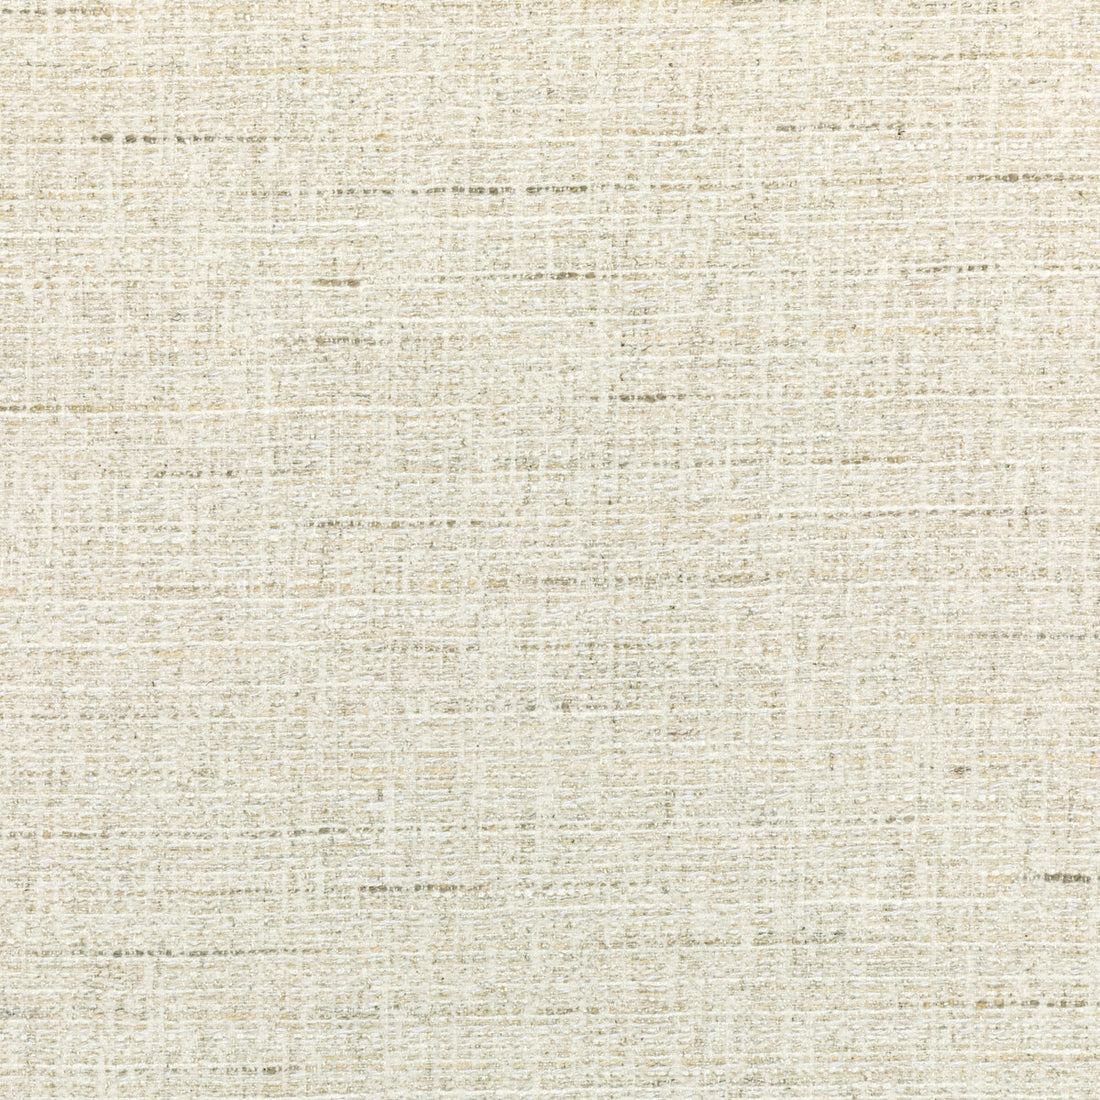 Kravet Couture fabric in 36602-16 color - pattern 36602.16.0 - by Kravet Couture in the Mabley Handler collection